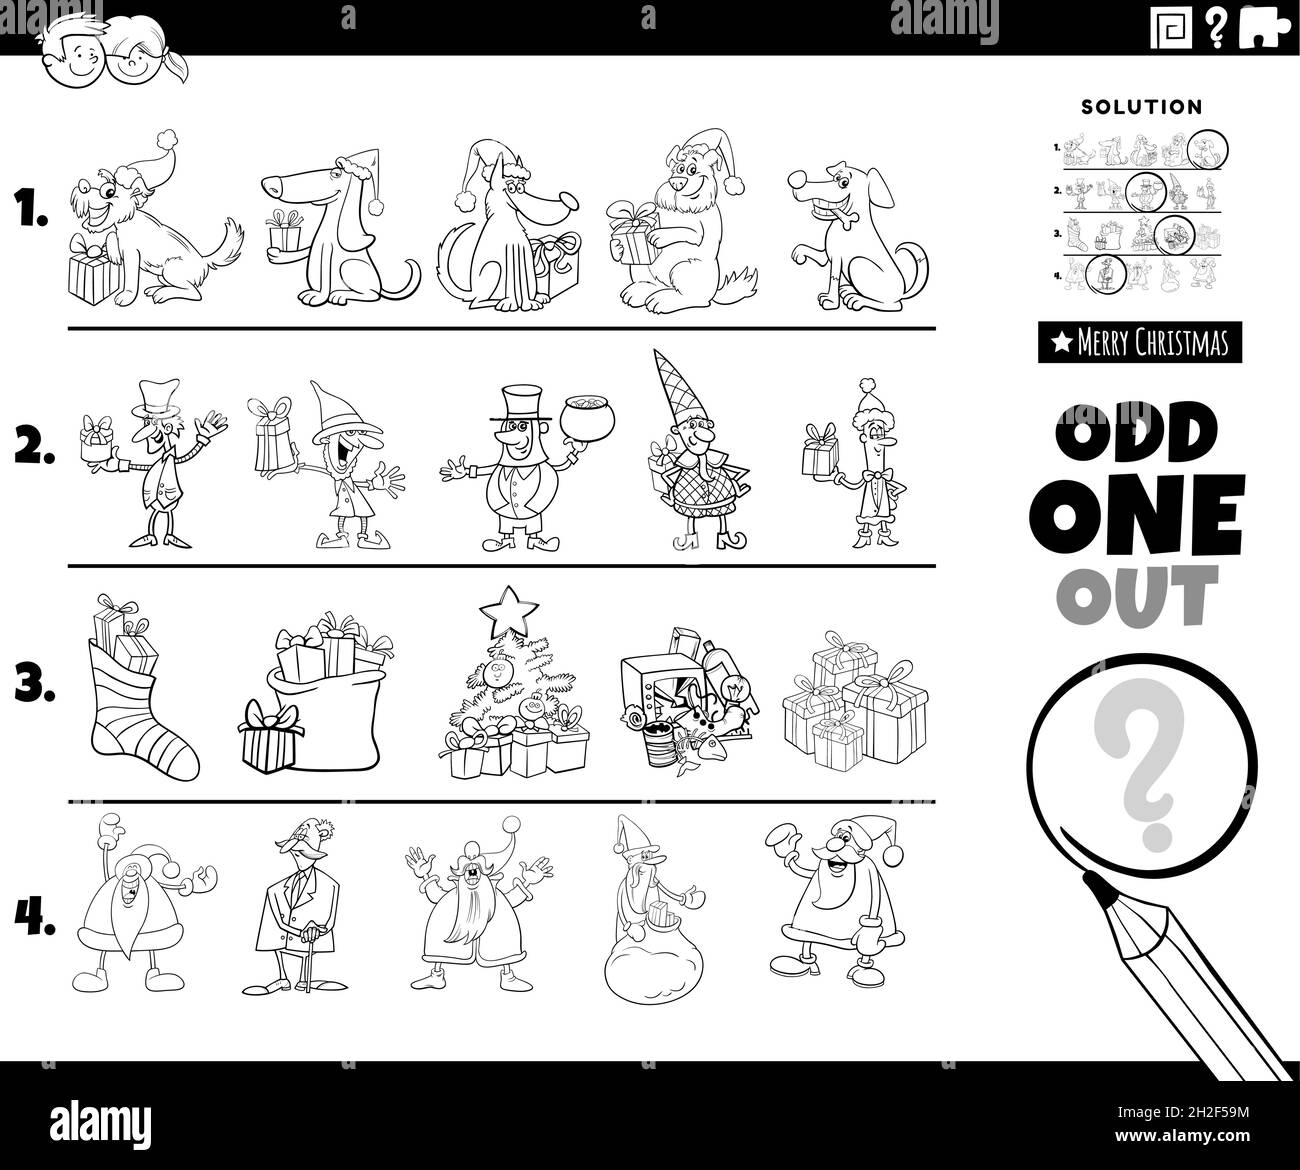 Black and white cartoon illustration of odd one out picture in a row educational game for children with Christmas holiday characters and objects color Stock Vector